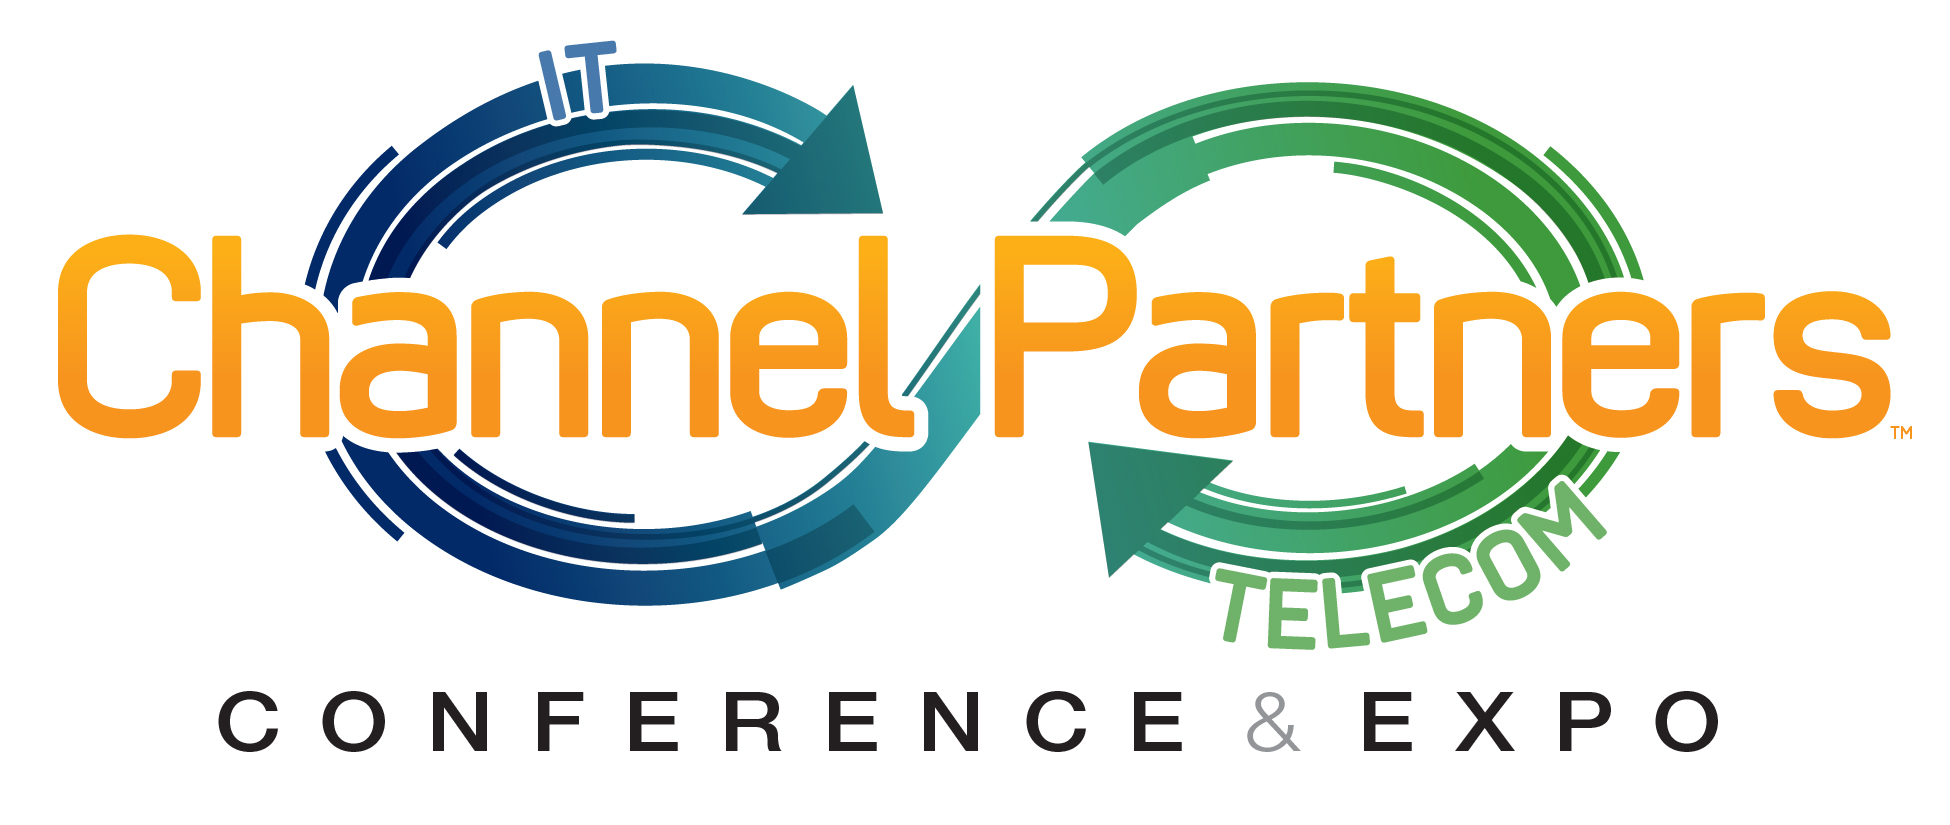 Aqua Connect and RapidScale To Host First CloudTalk Events At Channel Partners in Las Vegas